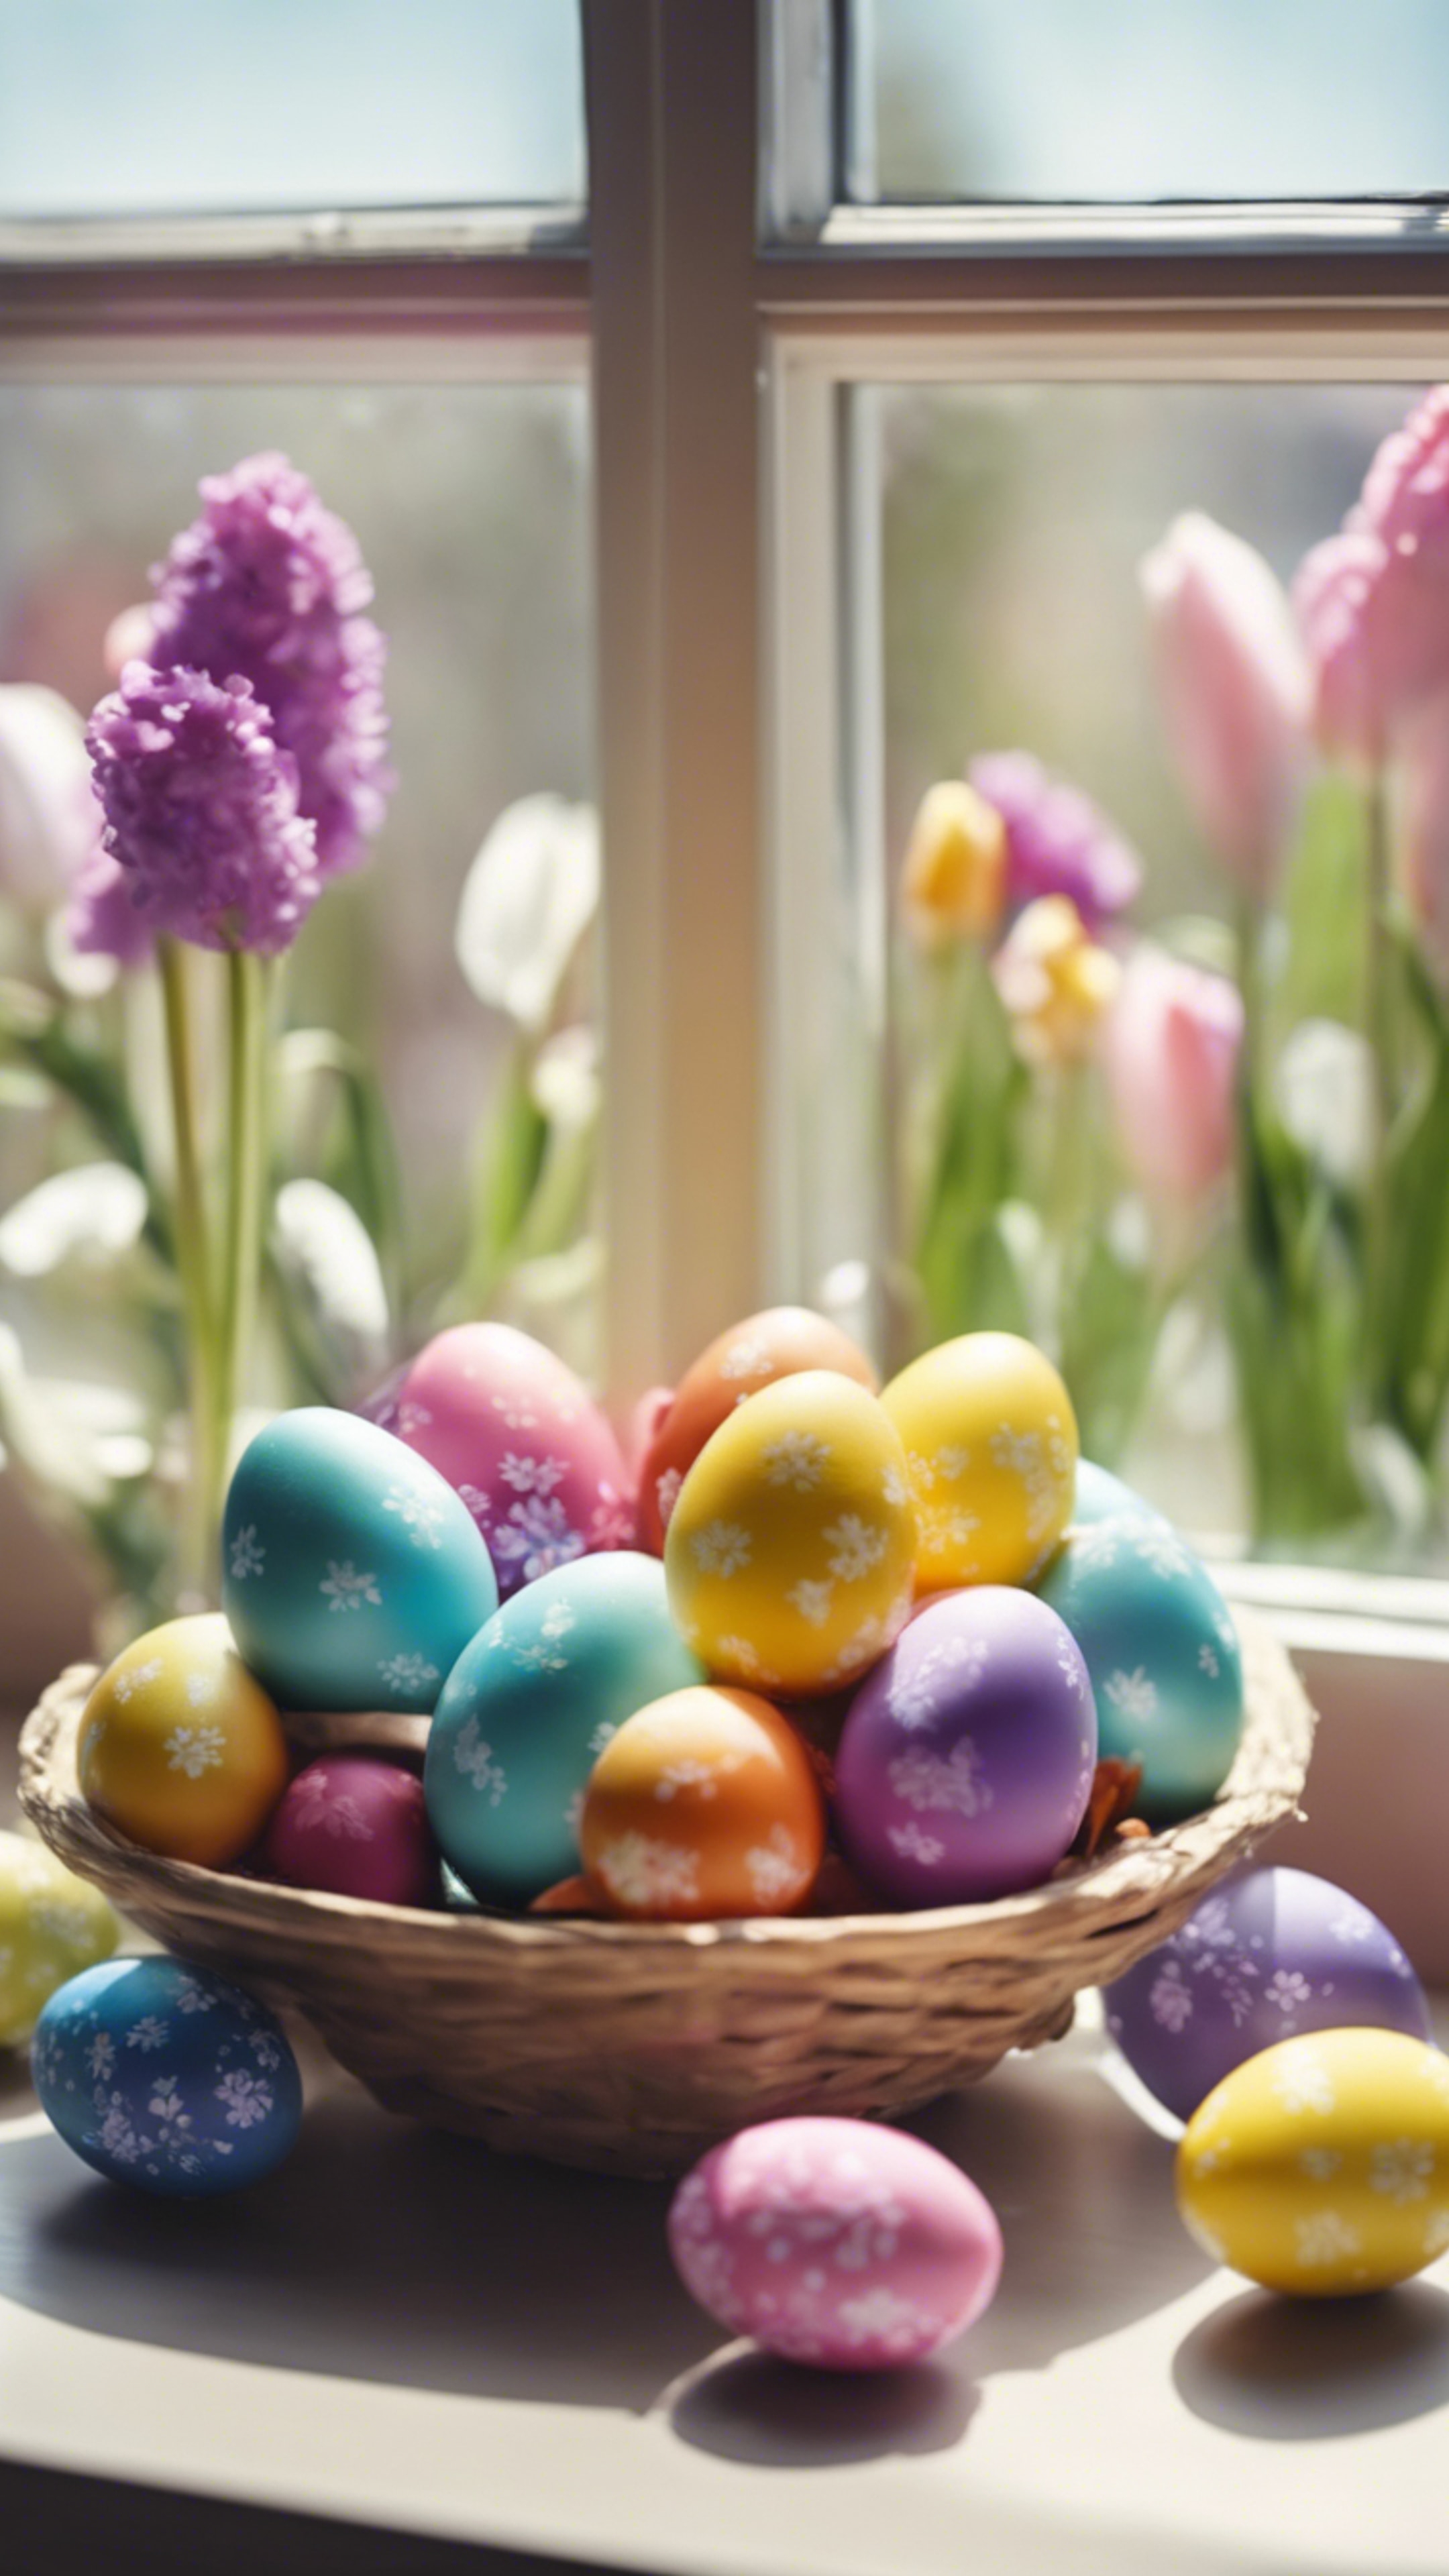 Rainbow Easter eggs displayed on a sunny windowsill among fragrant spring flowers.壁紙[d79aa761c1b244c3af52]